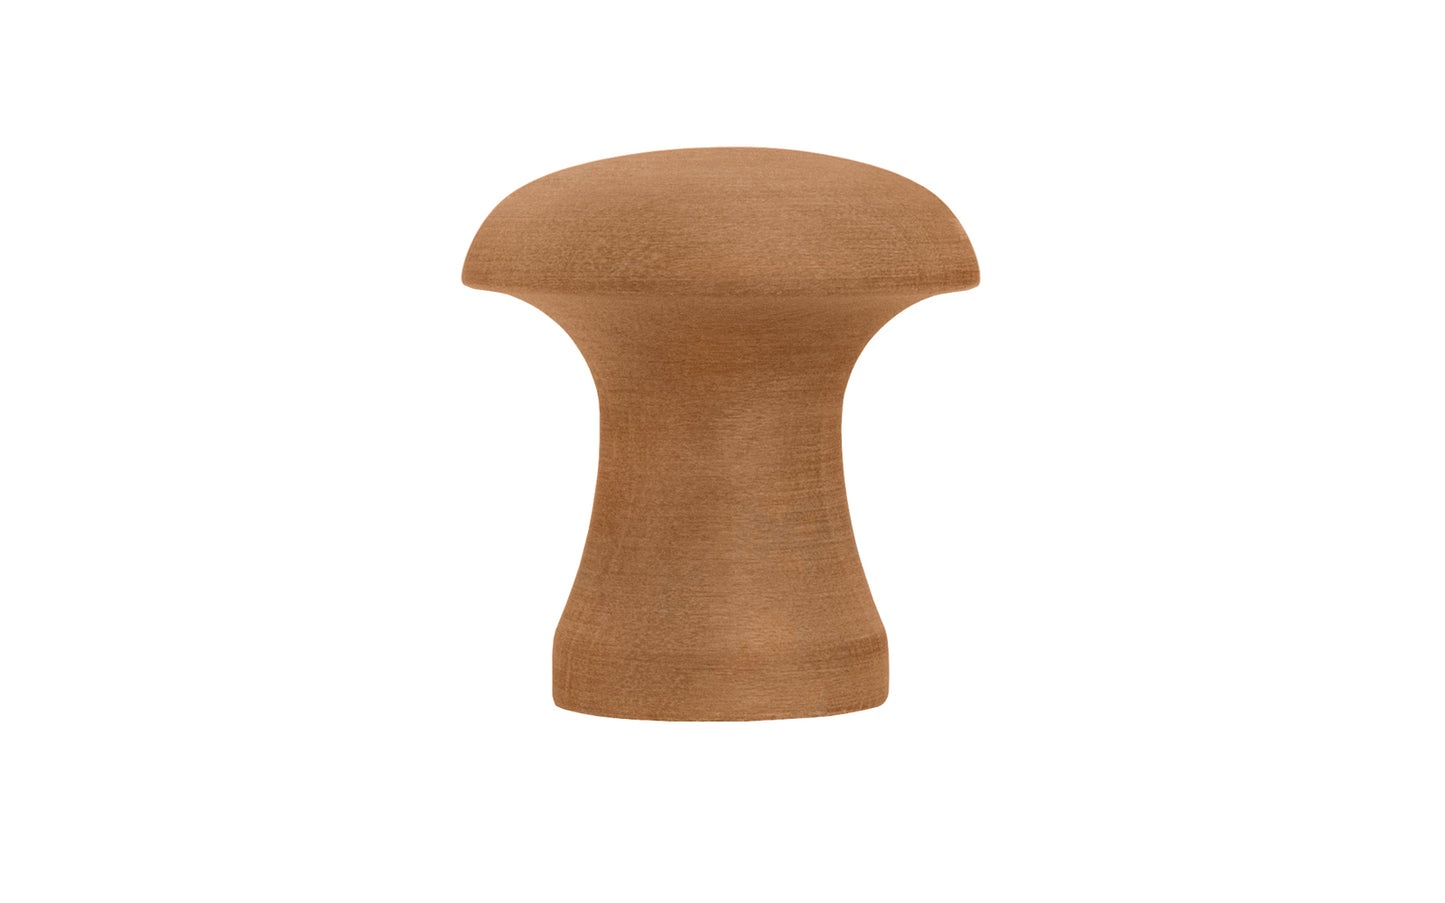 Classic & traditional Shaker-style solid wood cabinet knobs. Cherry Wood Knob. These charming wood knobs have a smooth & attractive look & feel. Wooden shaker knob for cabinets, drawers, & furniture. Unfinished mushroom shape wood knob.